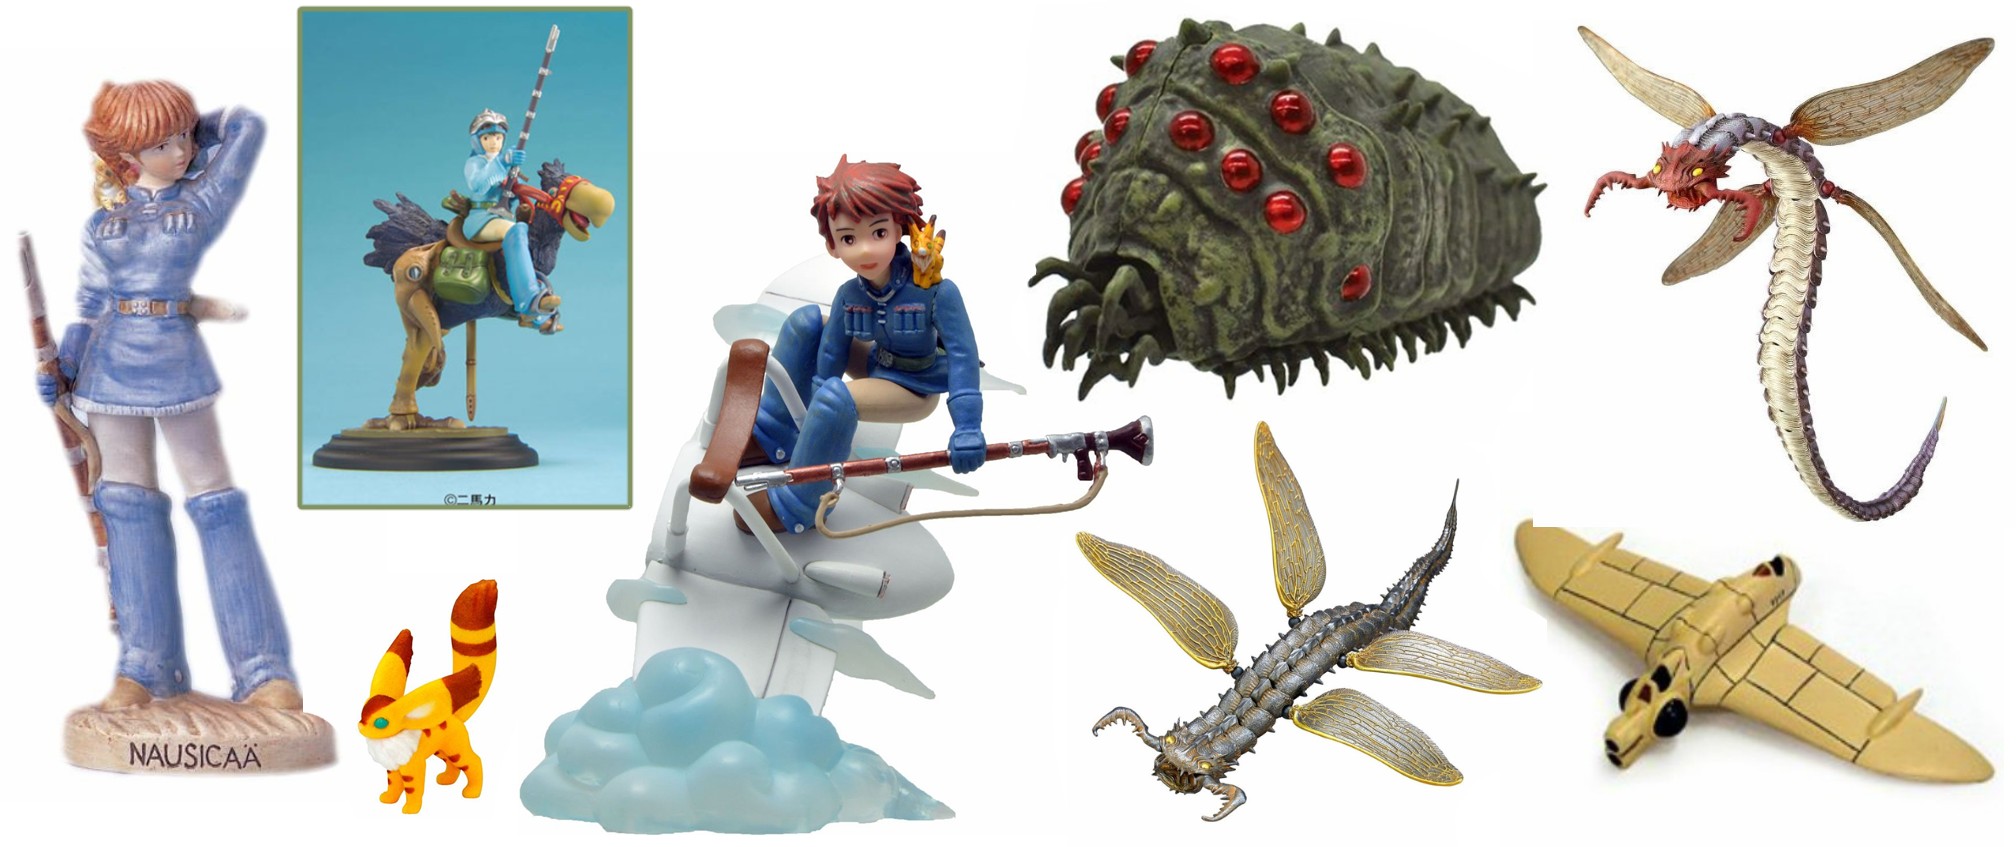 Nausicaa of the Valley of the Wind Figurines